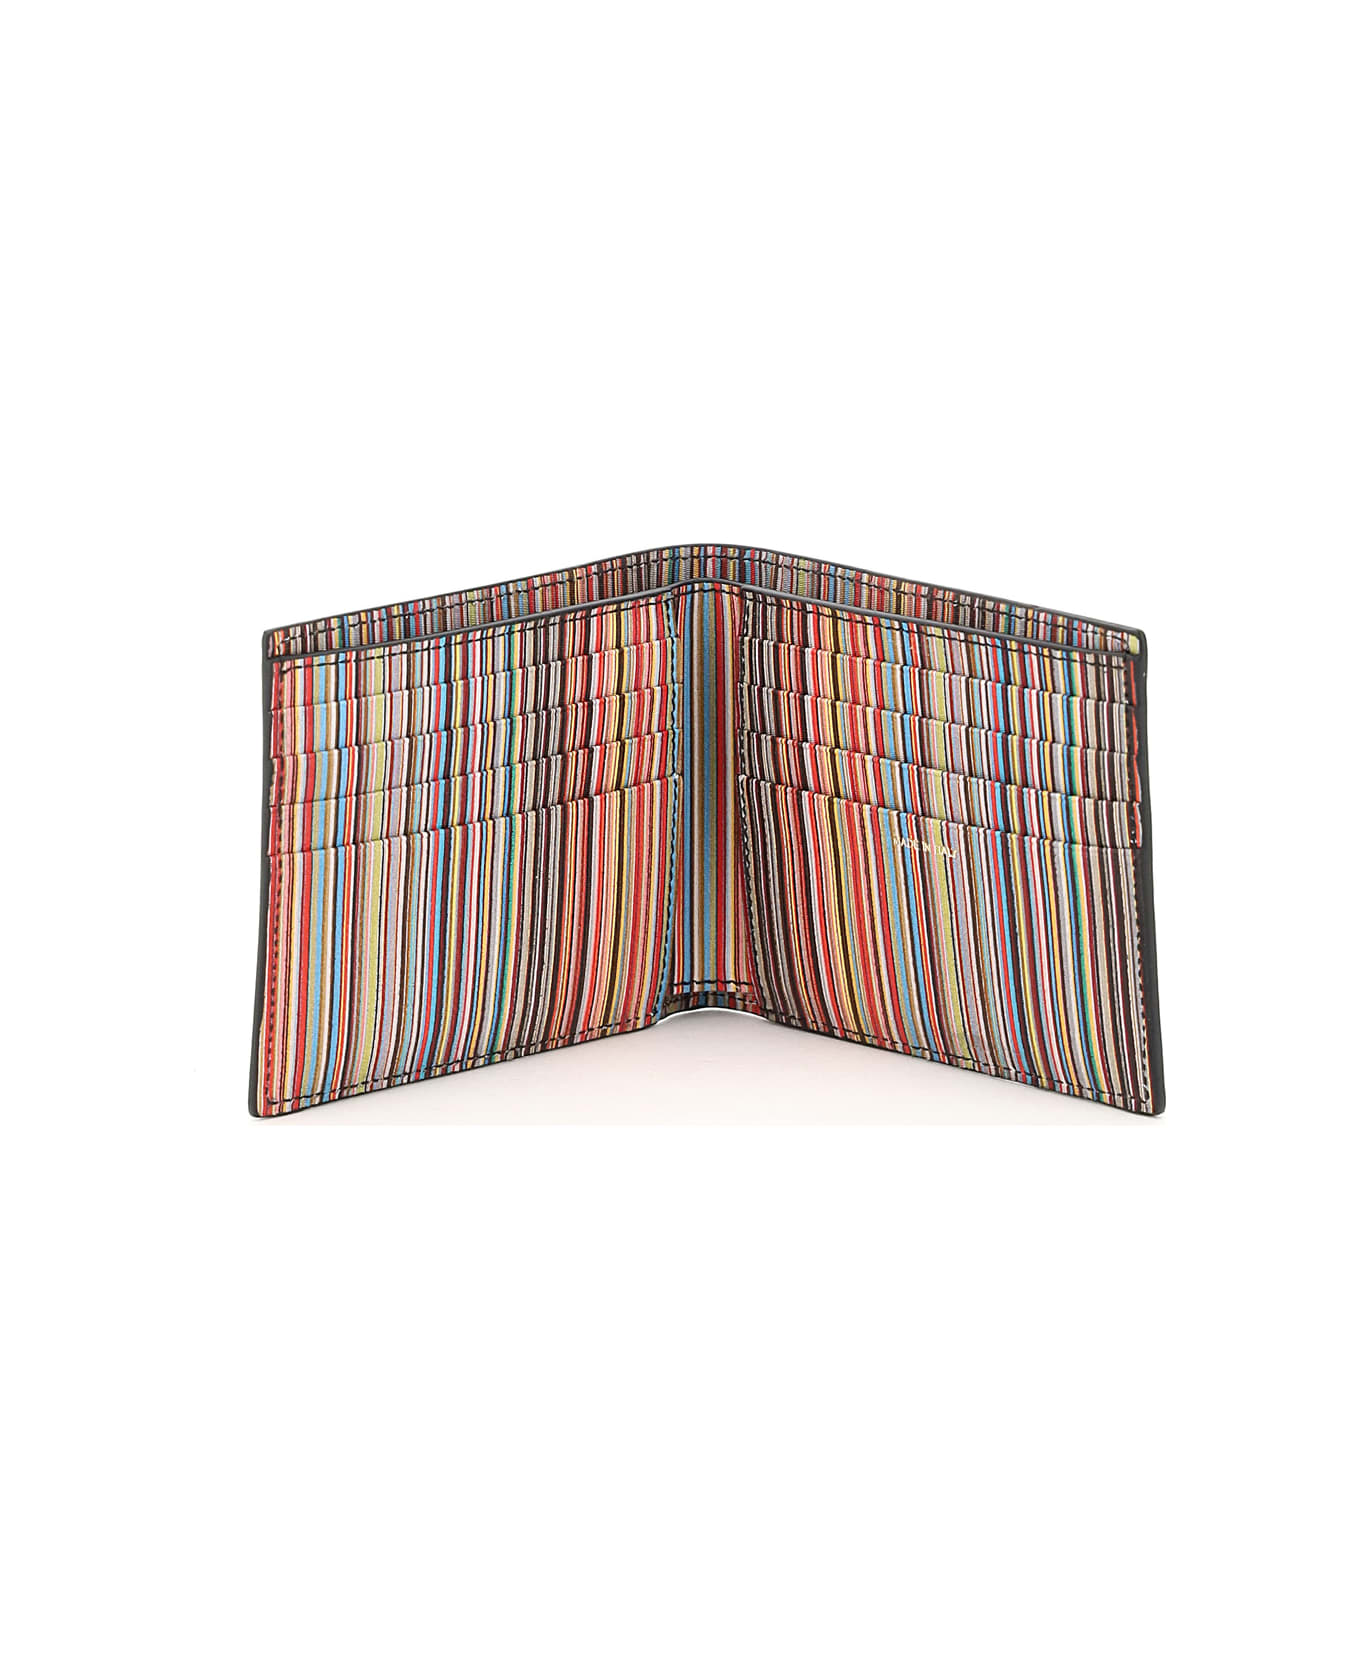 PS by Paul Smith Signature Stripe Wallet Wallet - NERO